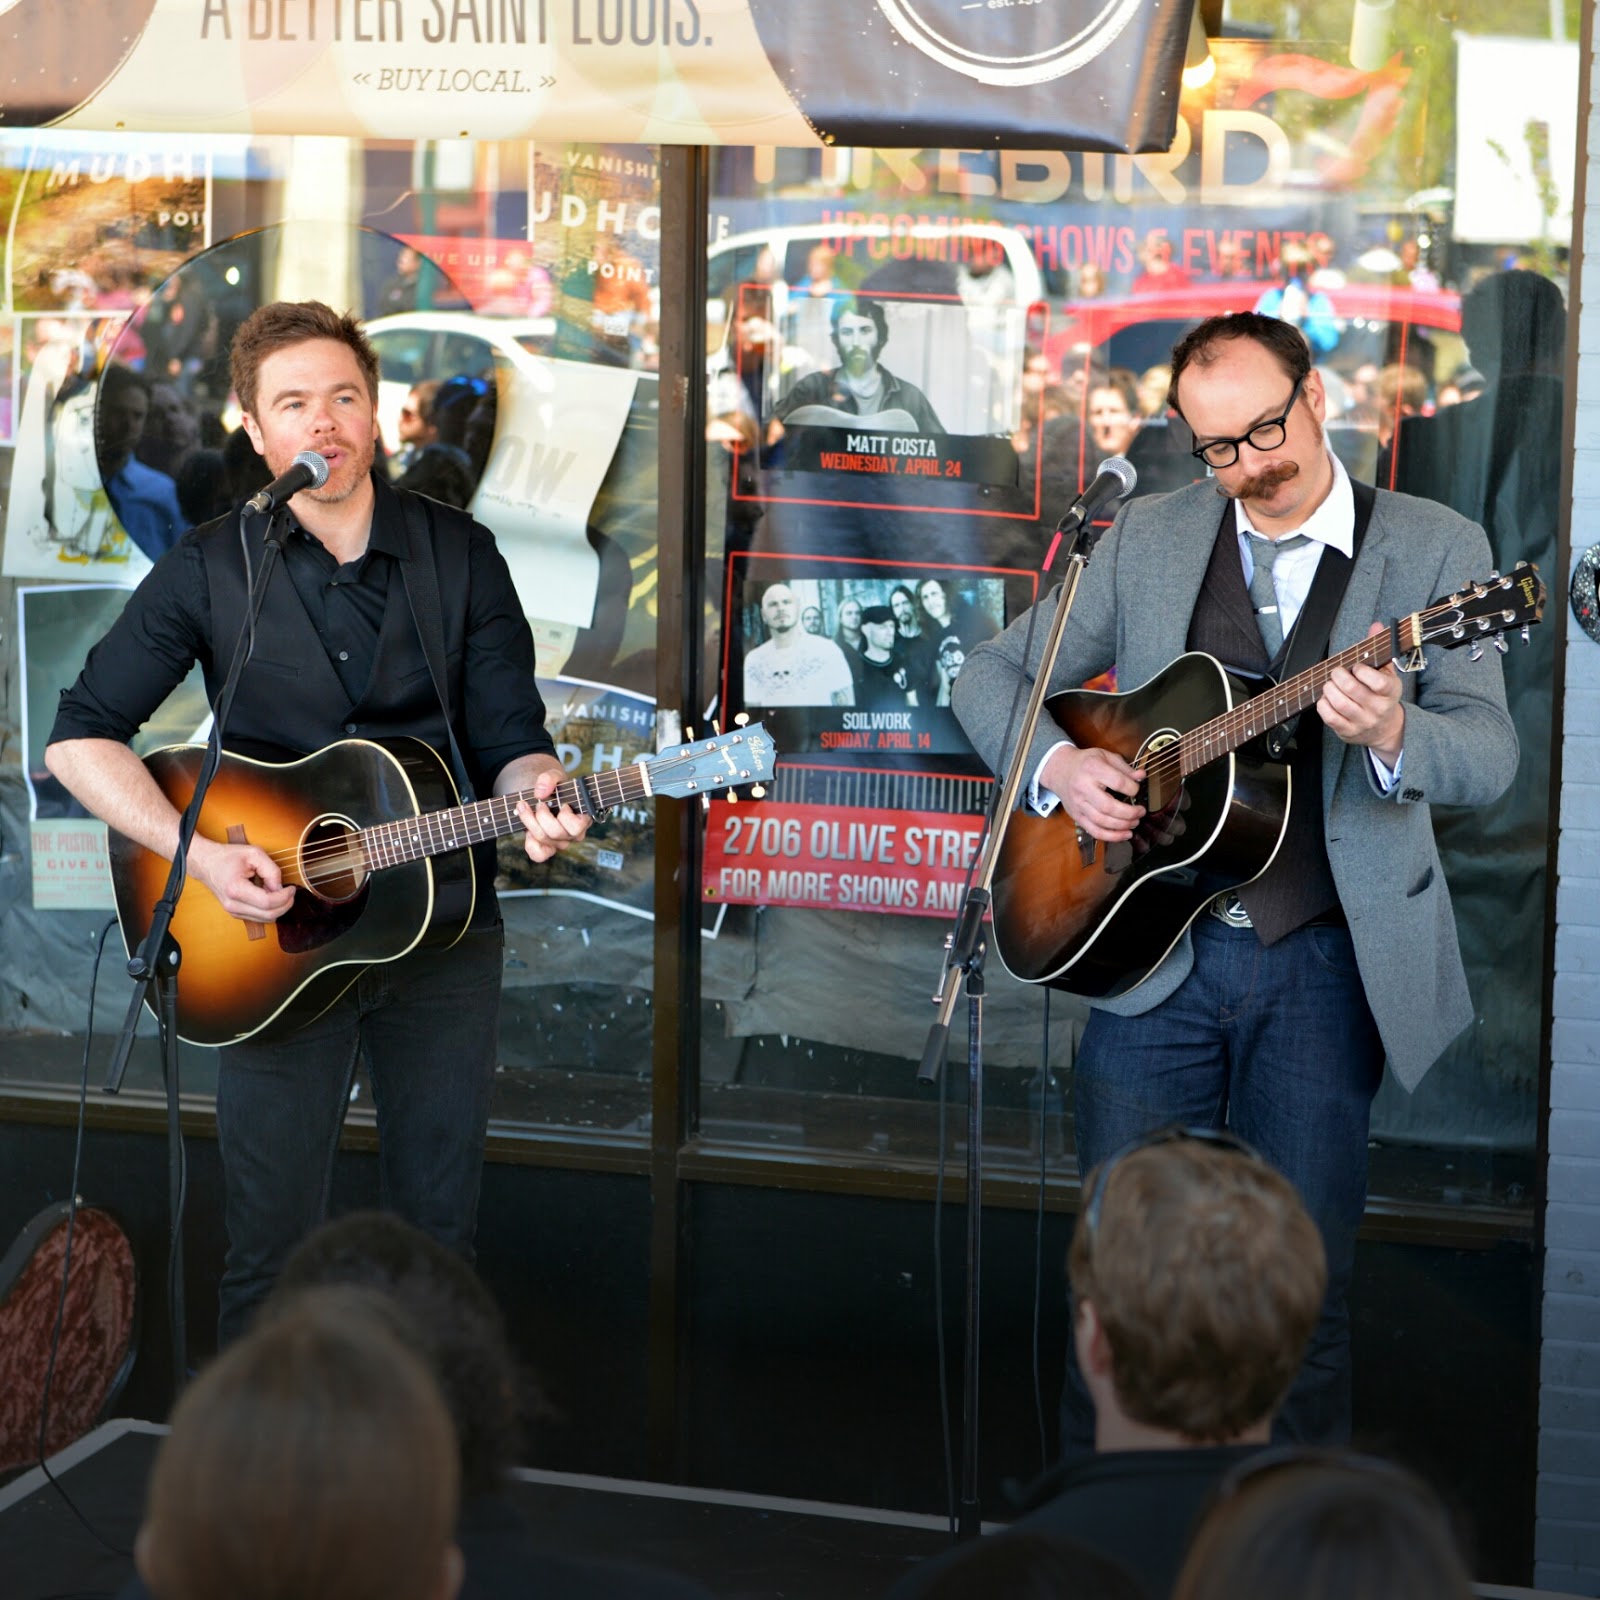 Speakers in Code: Download | Josh Ritter at Vintage Vinyl (April 20, 2013, Record Store Day ...